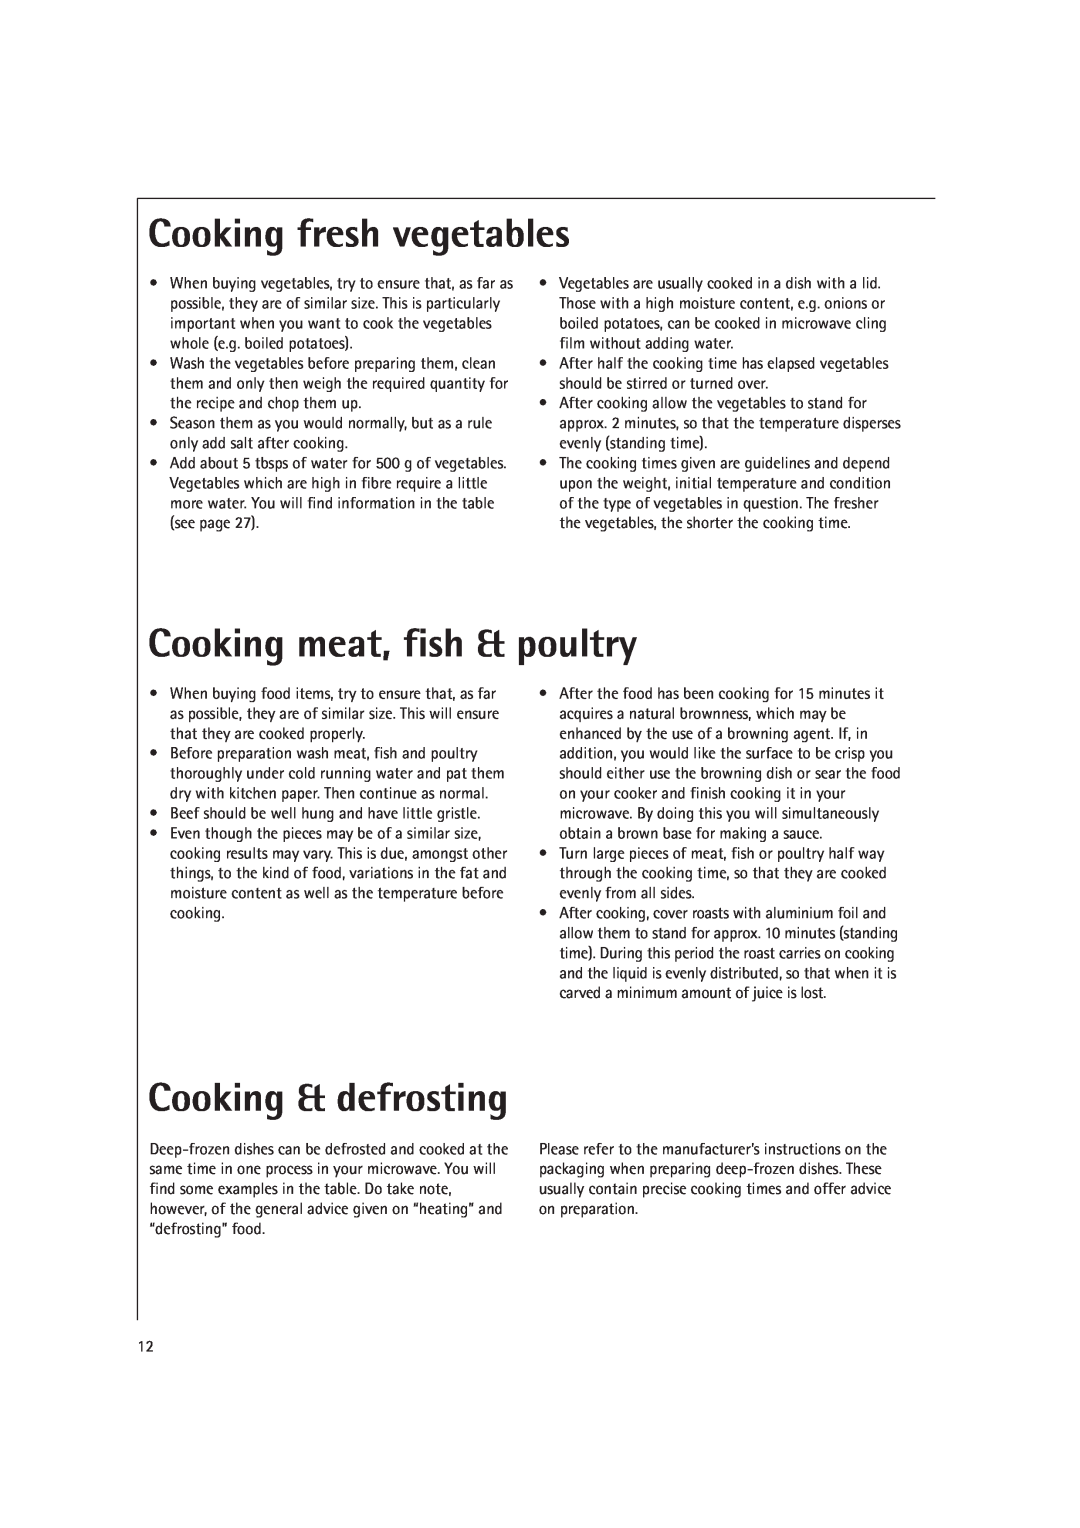 AEG MC2660E operating instructions Cooking fresh vegetables, Cooking meat, fish & poultry, Cooking & defrosting 